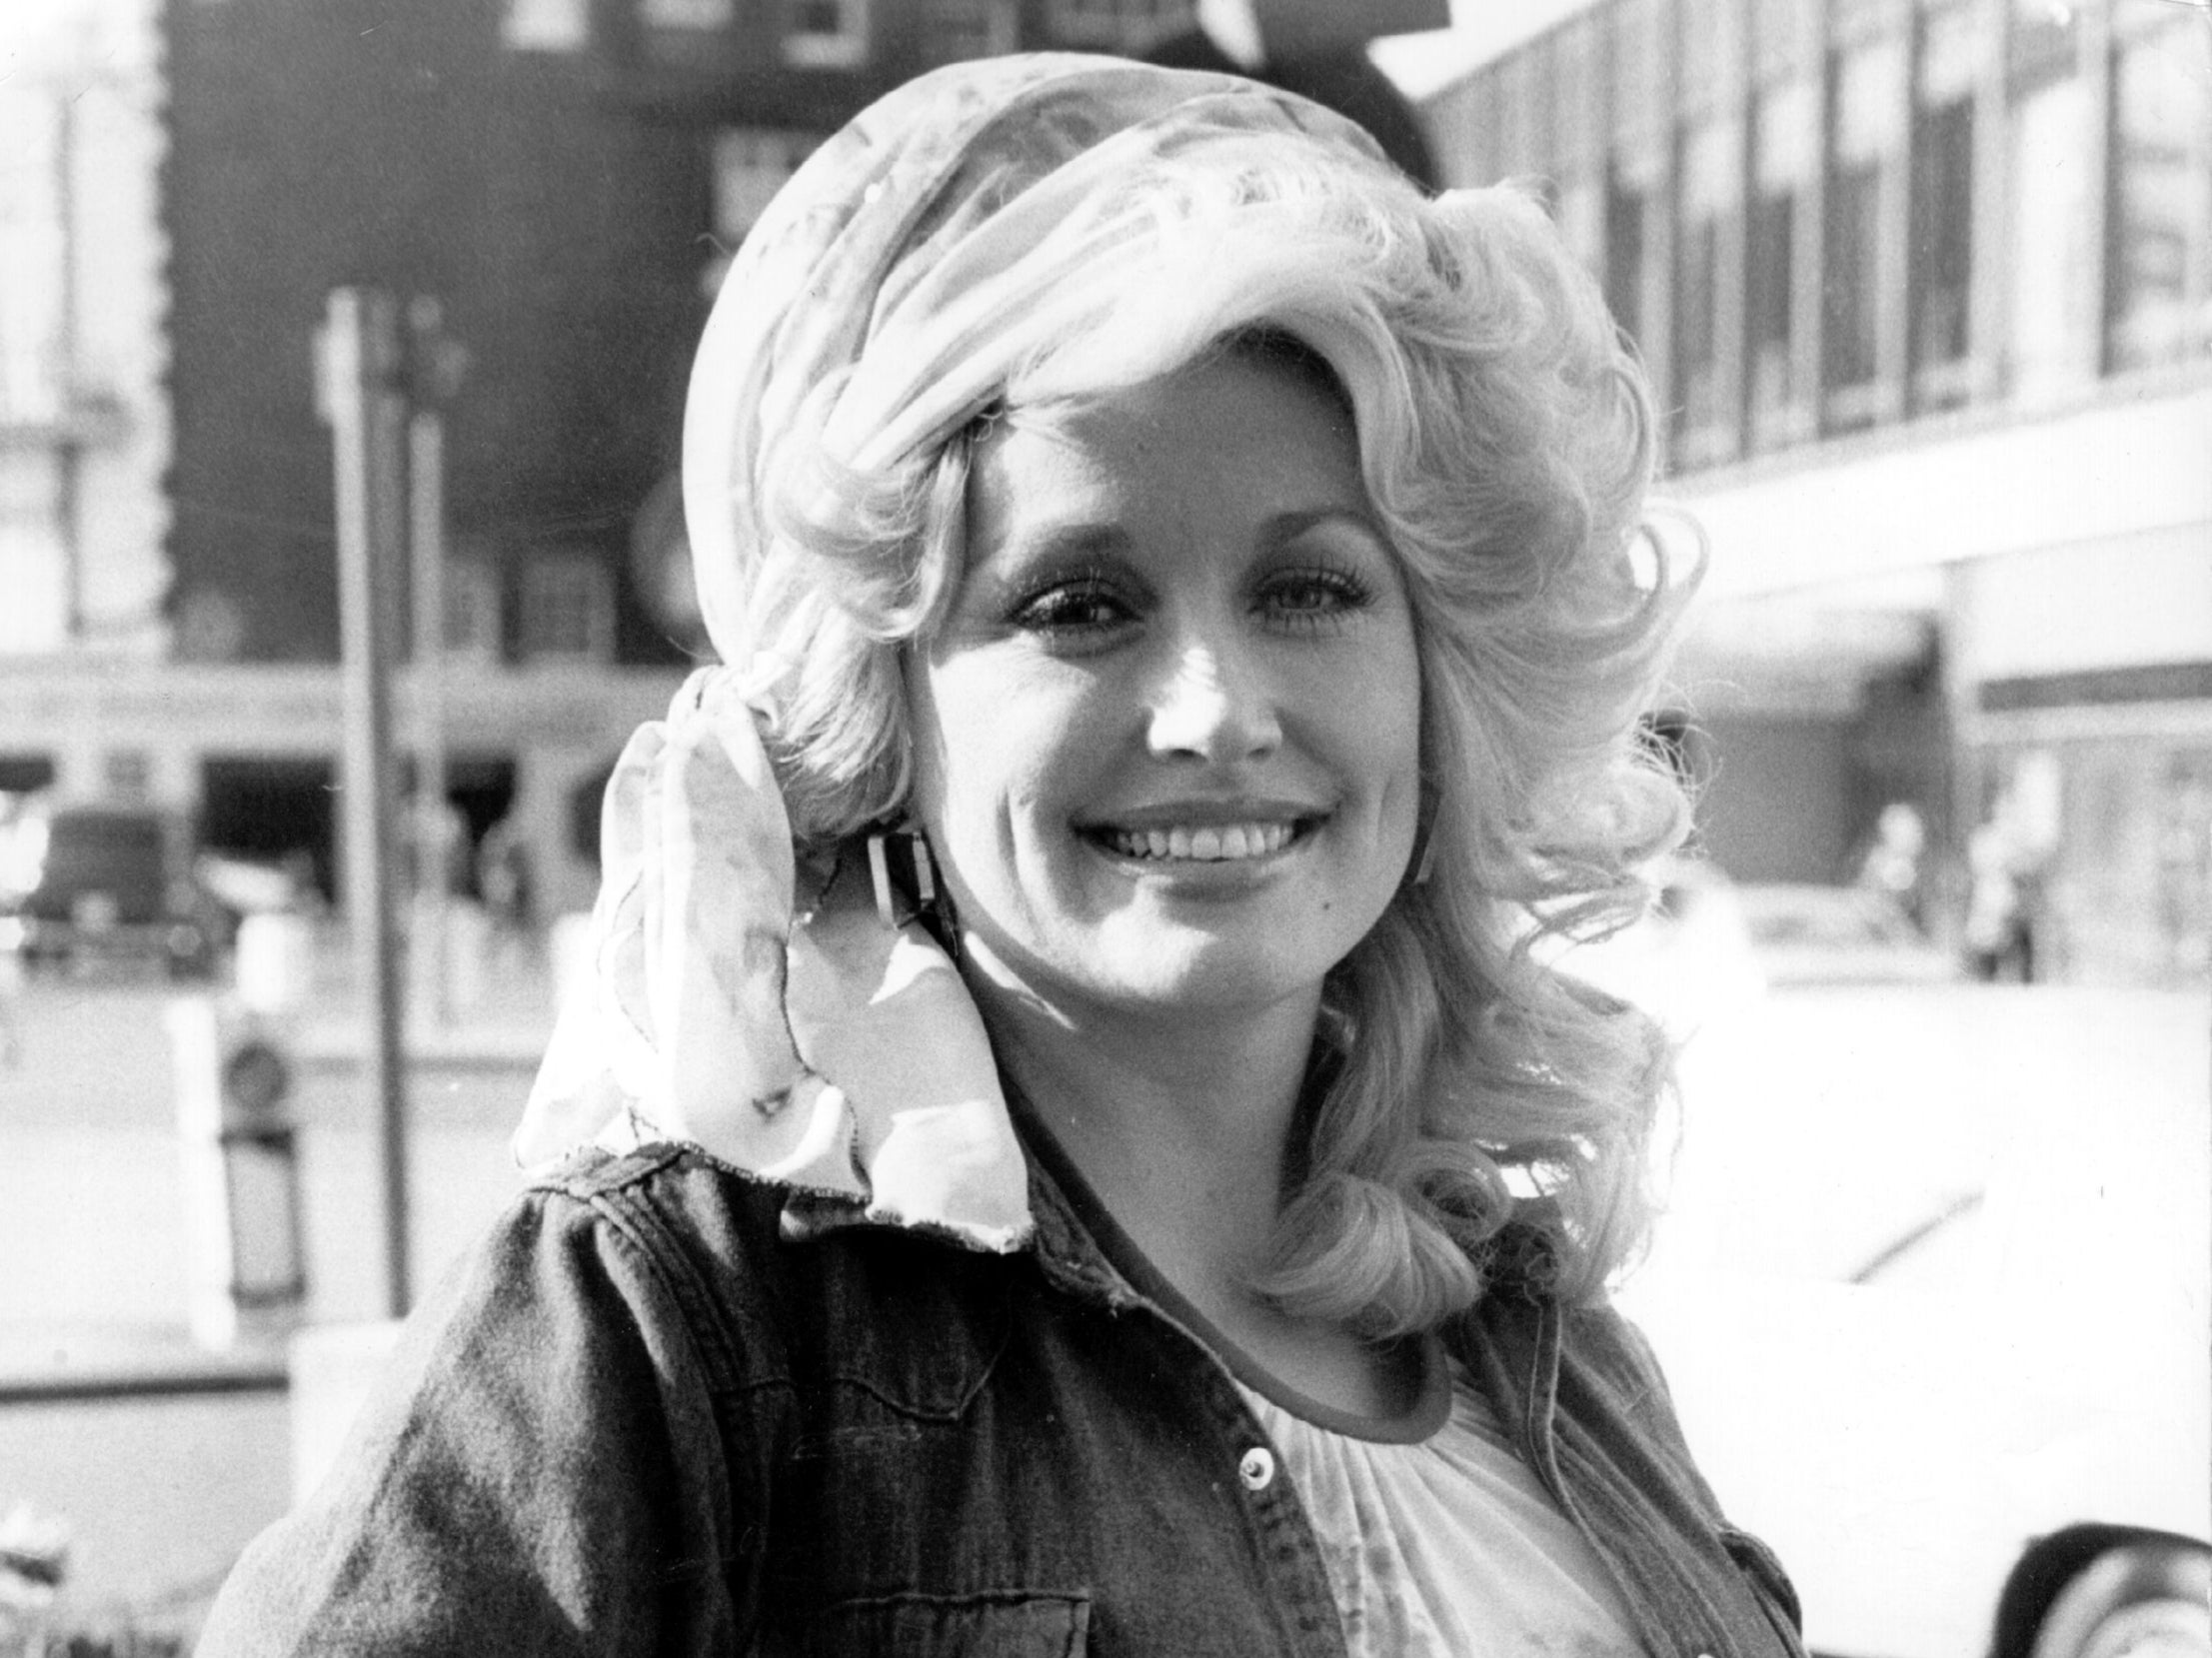 ‘Jolene’ introduced Parton to the UK charts